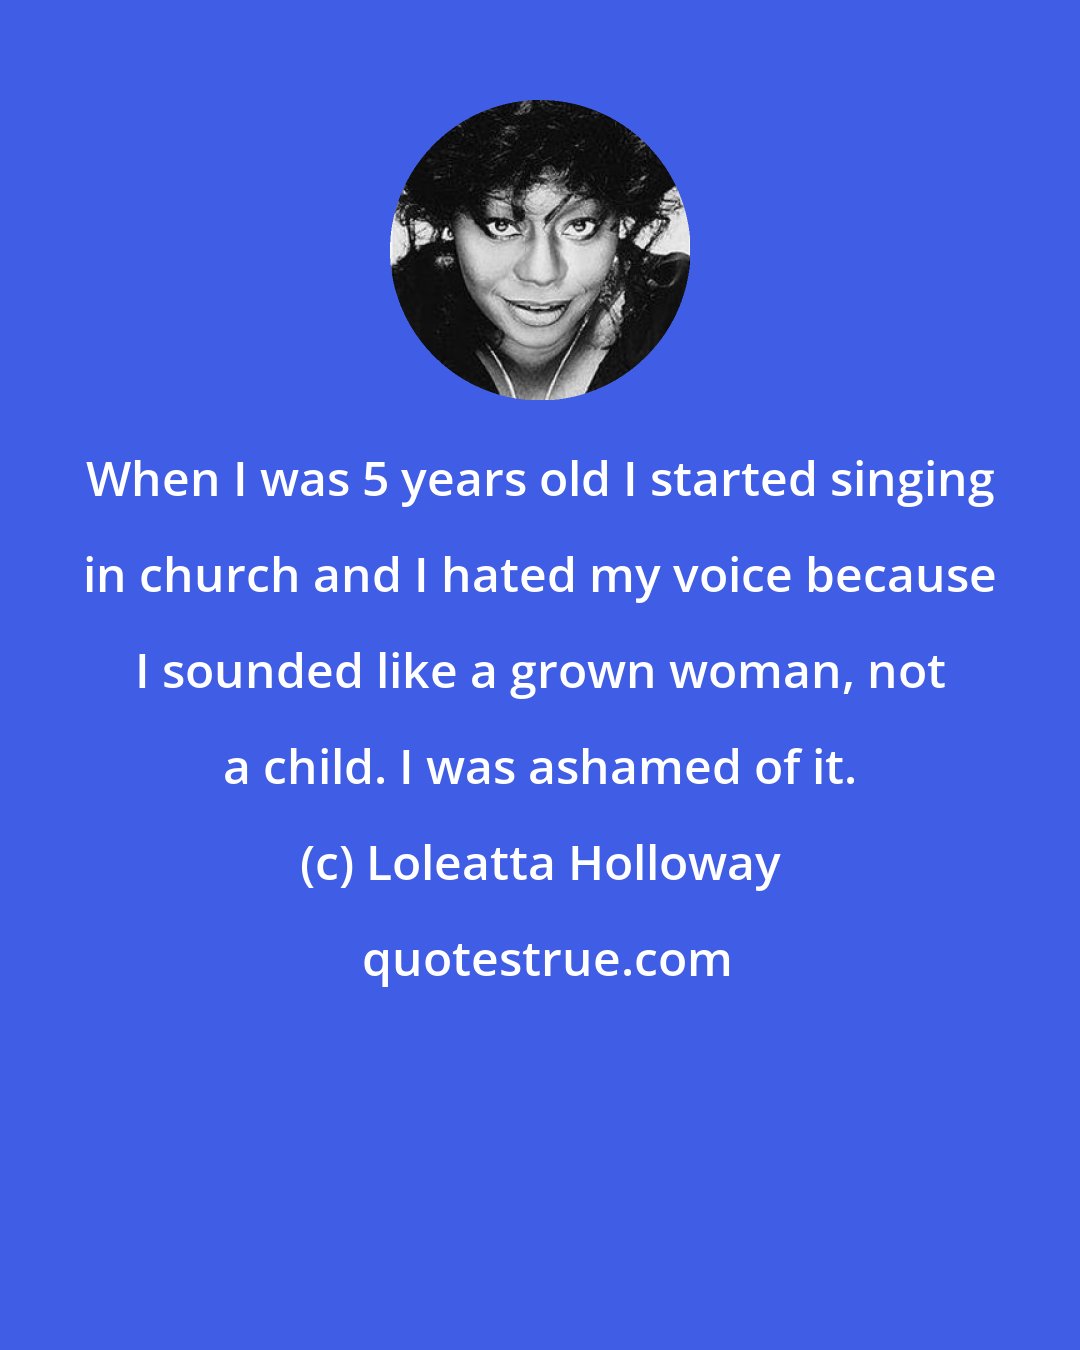 Loleatta Holloway: When I was 5 years old I started singing in church and I hated my voice because I sounded like a grown woman, not a child. I was ashamed of it.